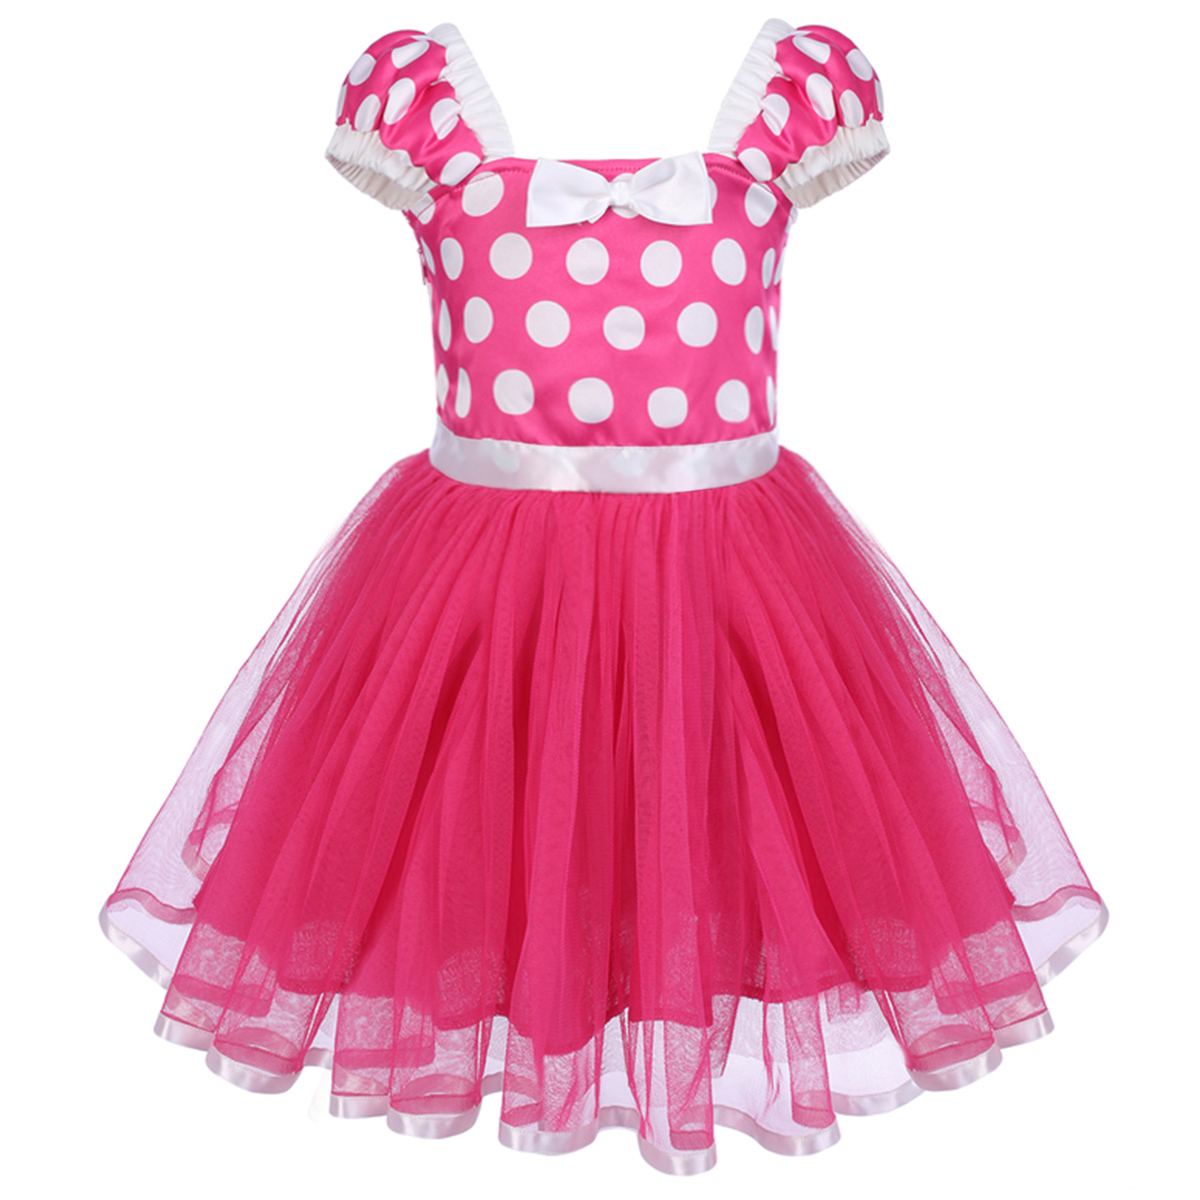 IBTOM CASTLE Toddler Girls Polka Dots Princess Party Cosplay Pageant Fancy Dress up Birthday Tutu Dress + Ears Headband Outfit Set 3-4 Years Hot Pink - image 3 of 8